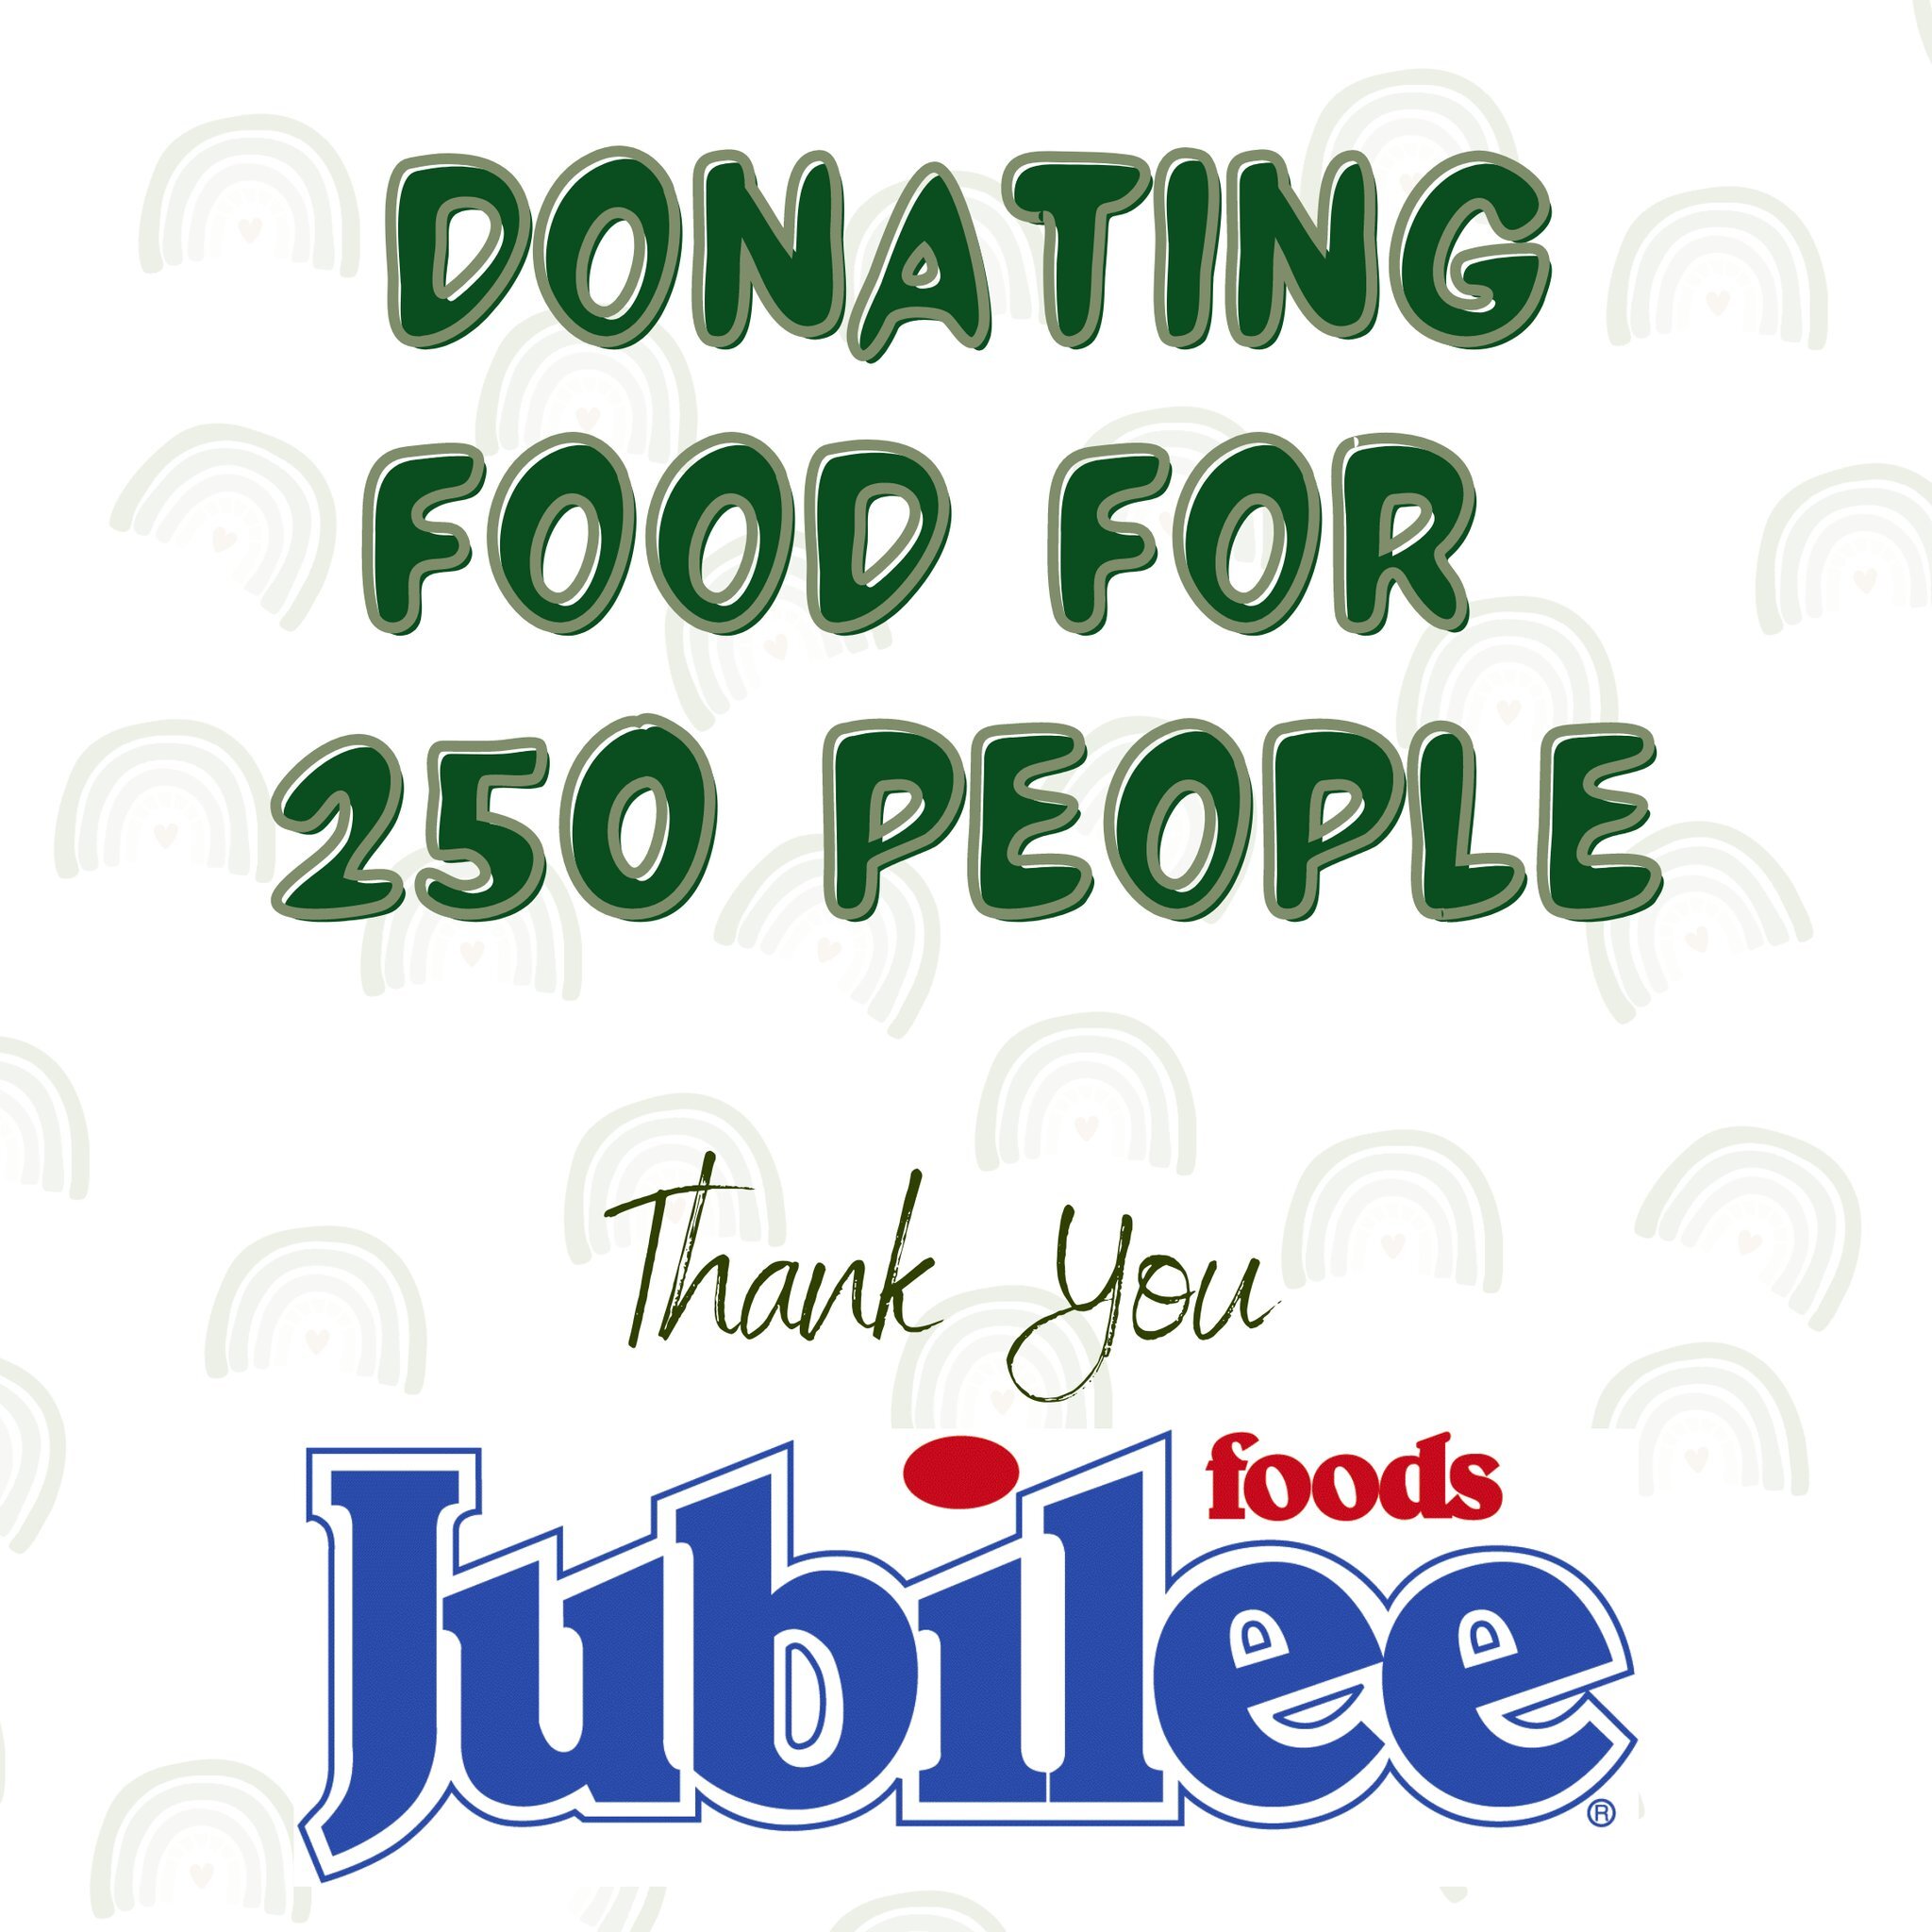 A huge thank you to our local grocery store, Jubilee Foods Mound, for donating walking tacos 🌮 for 250 people for our event this Saturday at the American Legion in Mound. With your donation of food, we are able to put the dollars raised directly to 